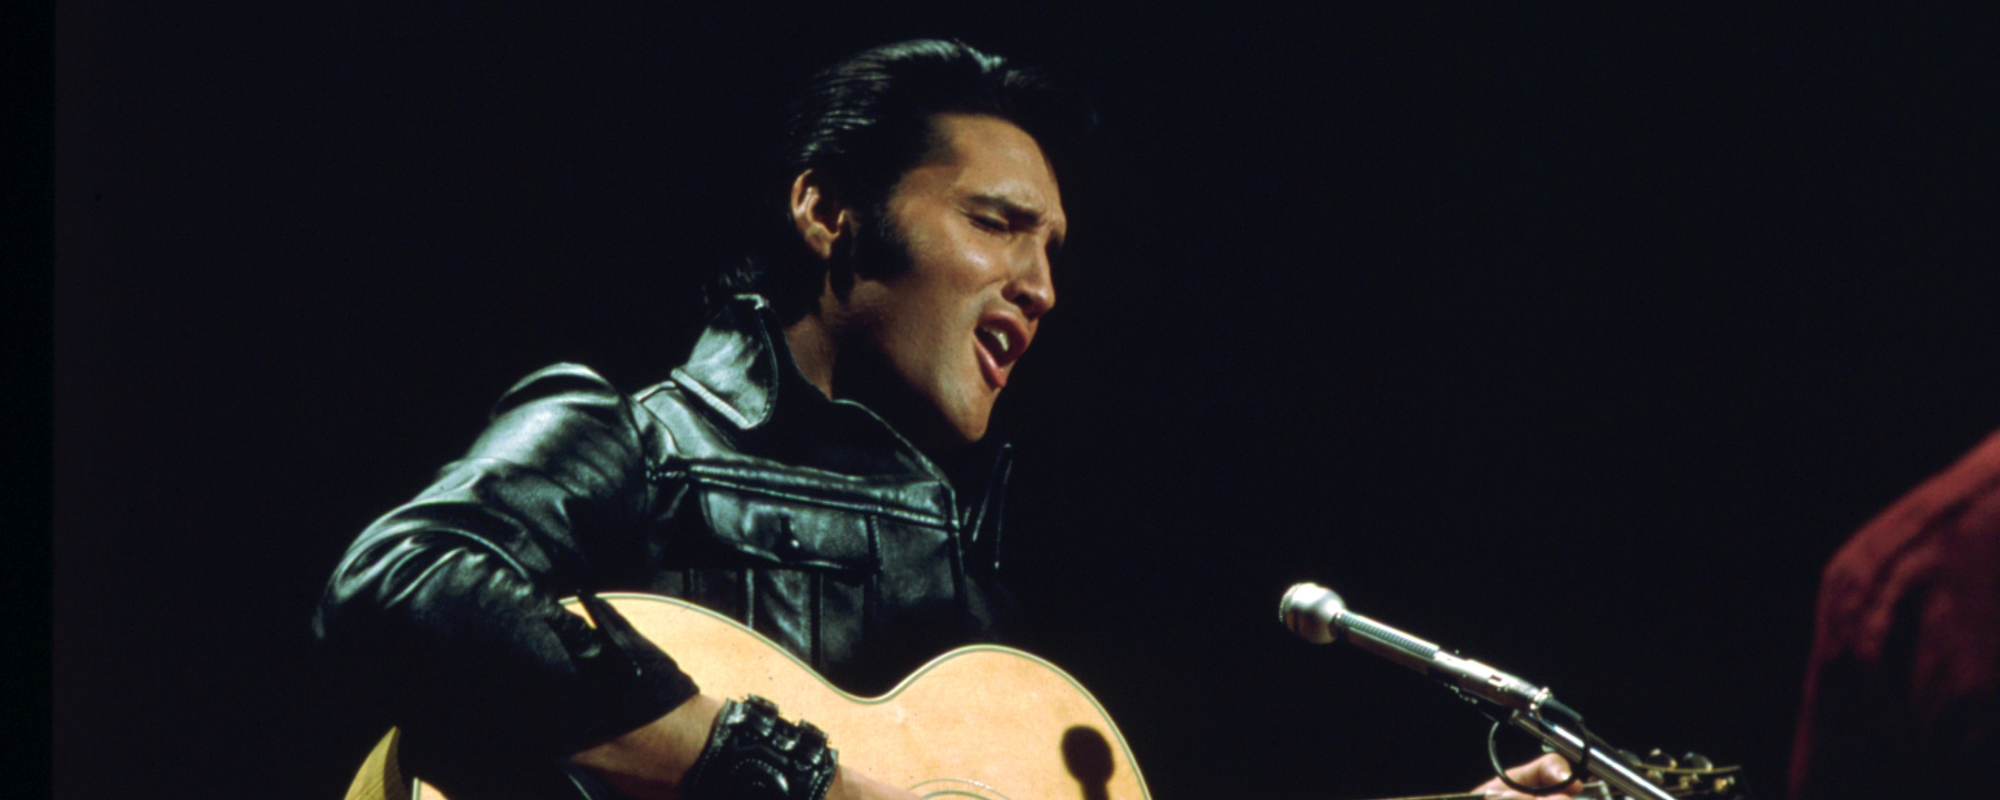 Behind the Meaning of the Song that Reinvented Elvis Presley’s Career, “If I Can Dream”